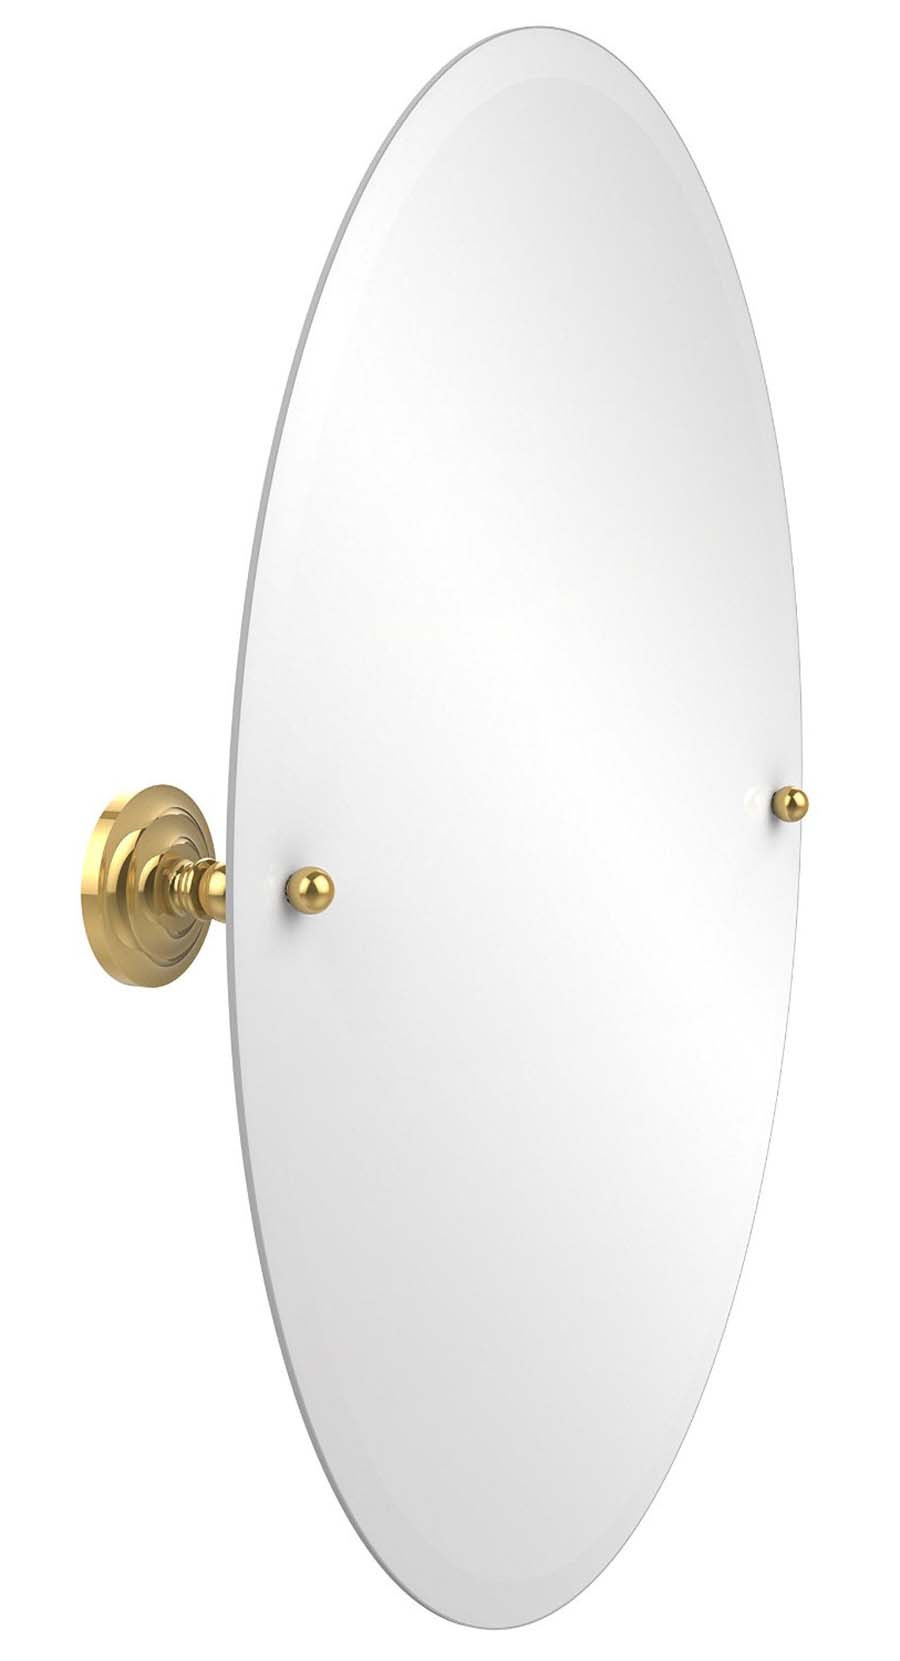 Allied Brass PQN-91-PB Oval Tilt Mirror with Beveled Edge in Polished Brass